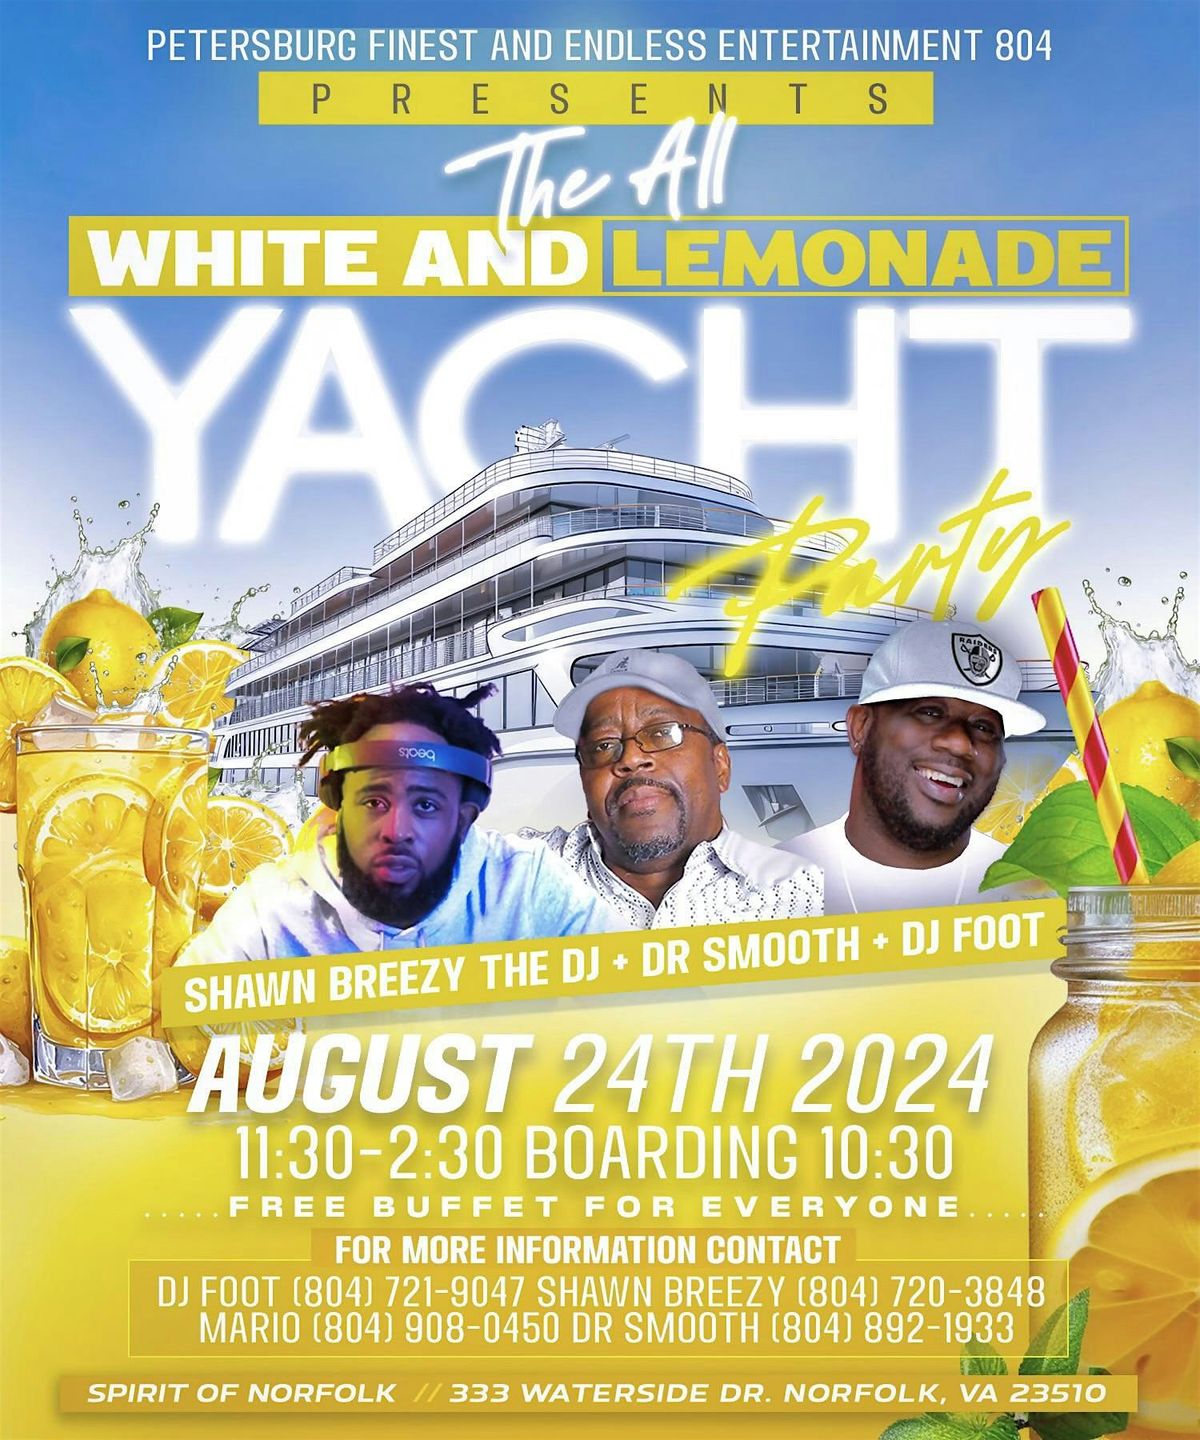 THE ALL WHITE AND LEMONADE YACHT PARTY